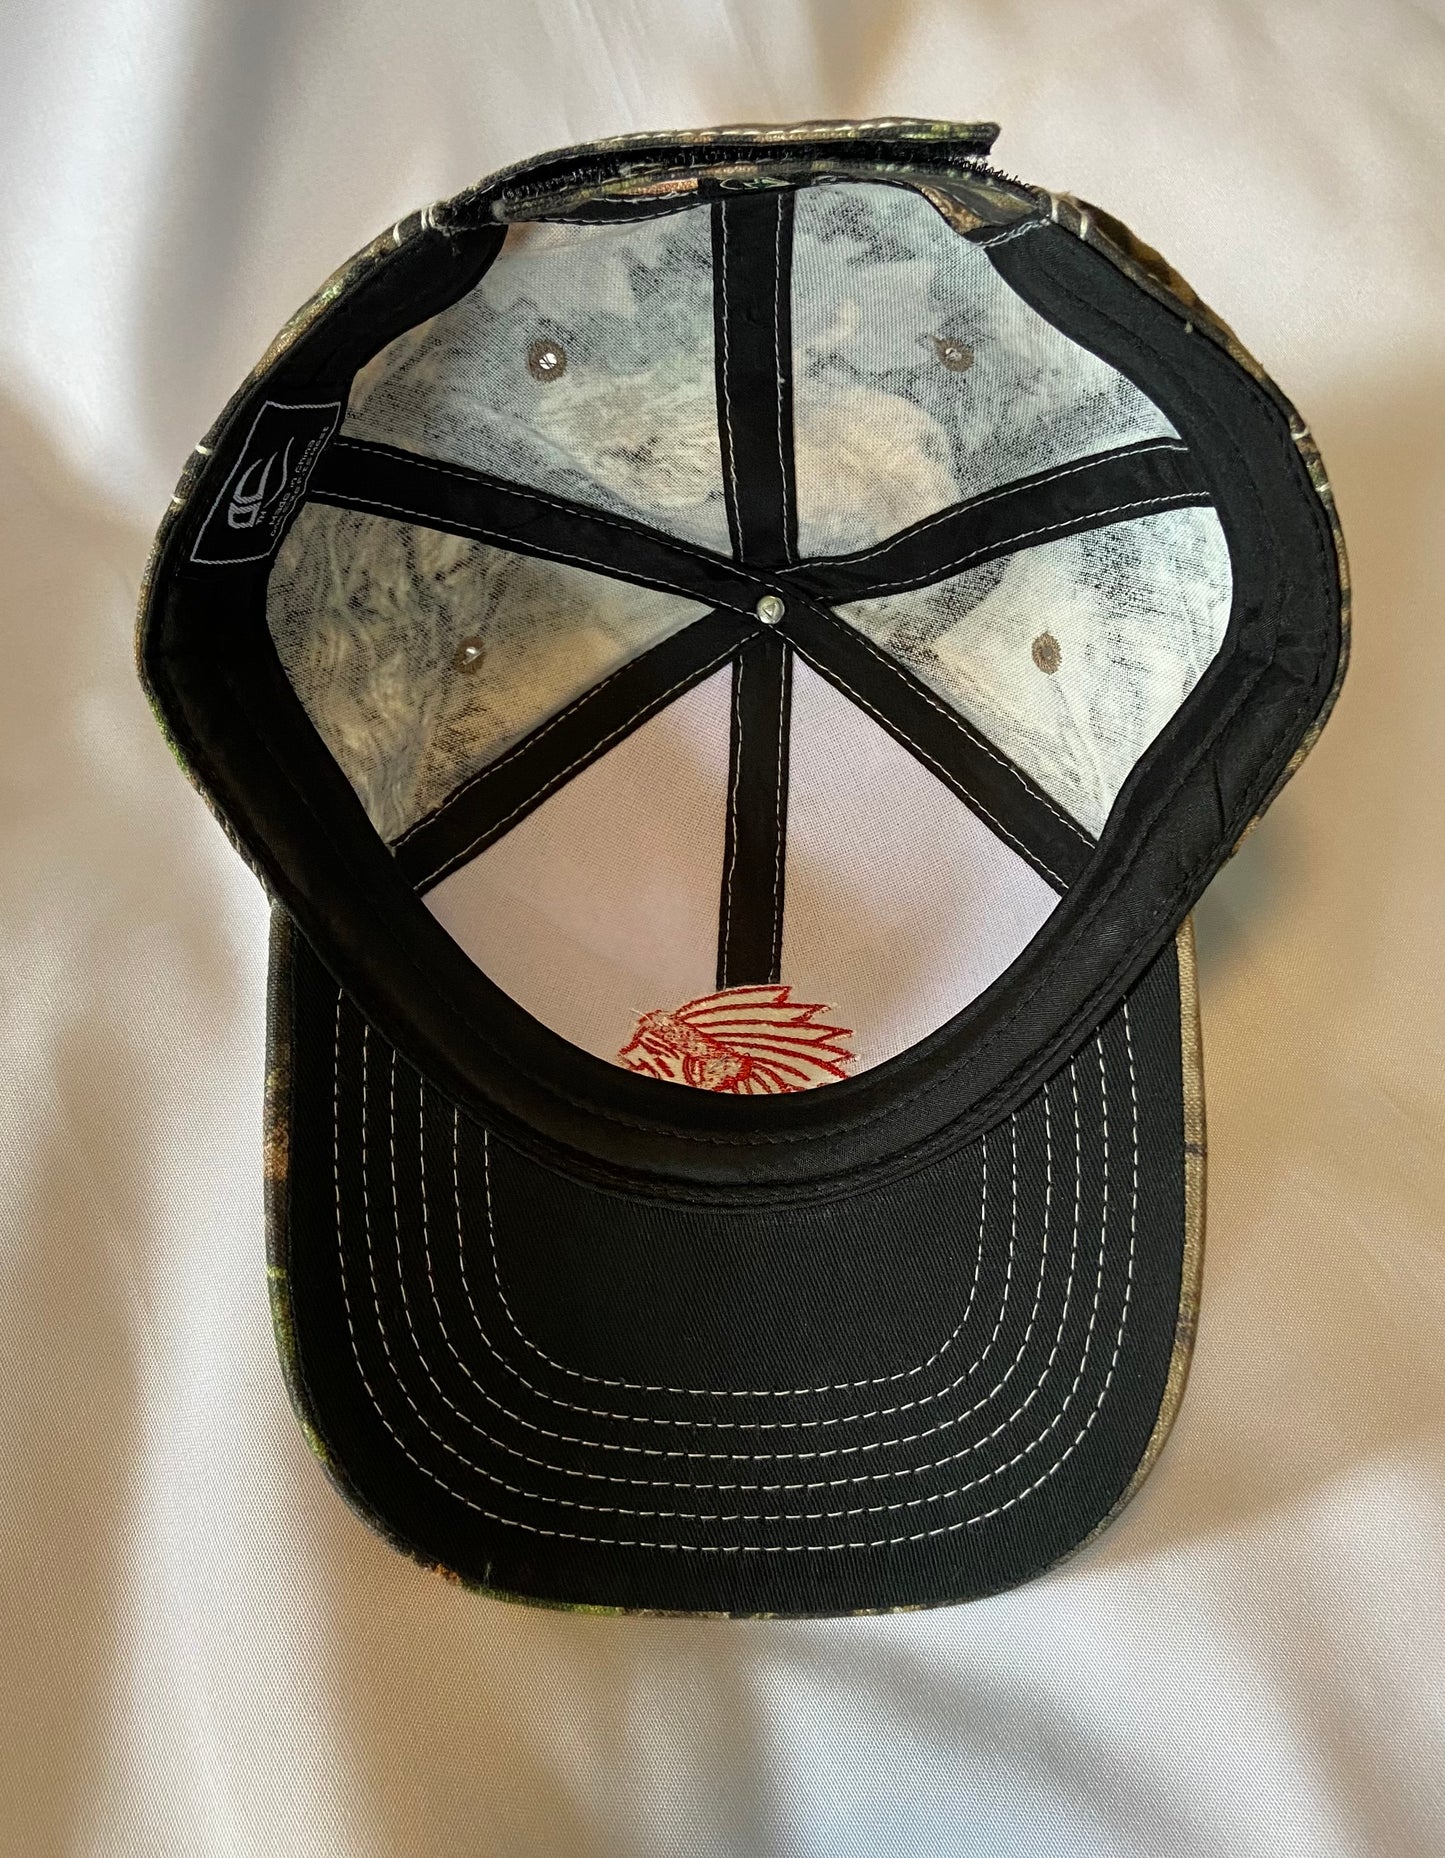 Knox Redskins Embroidered American Flag and Camo Mossy Oak Hat - Adjustable